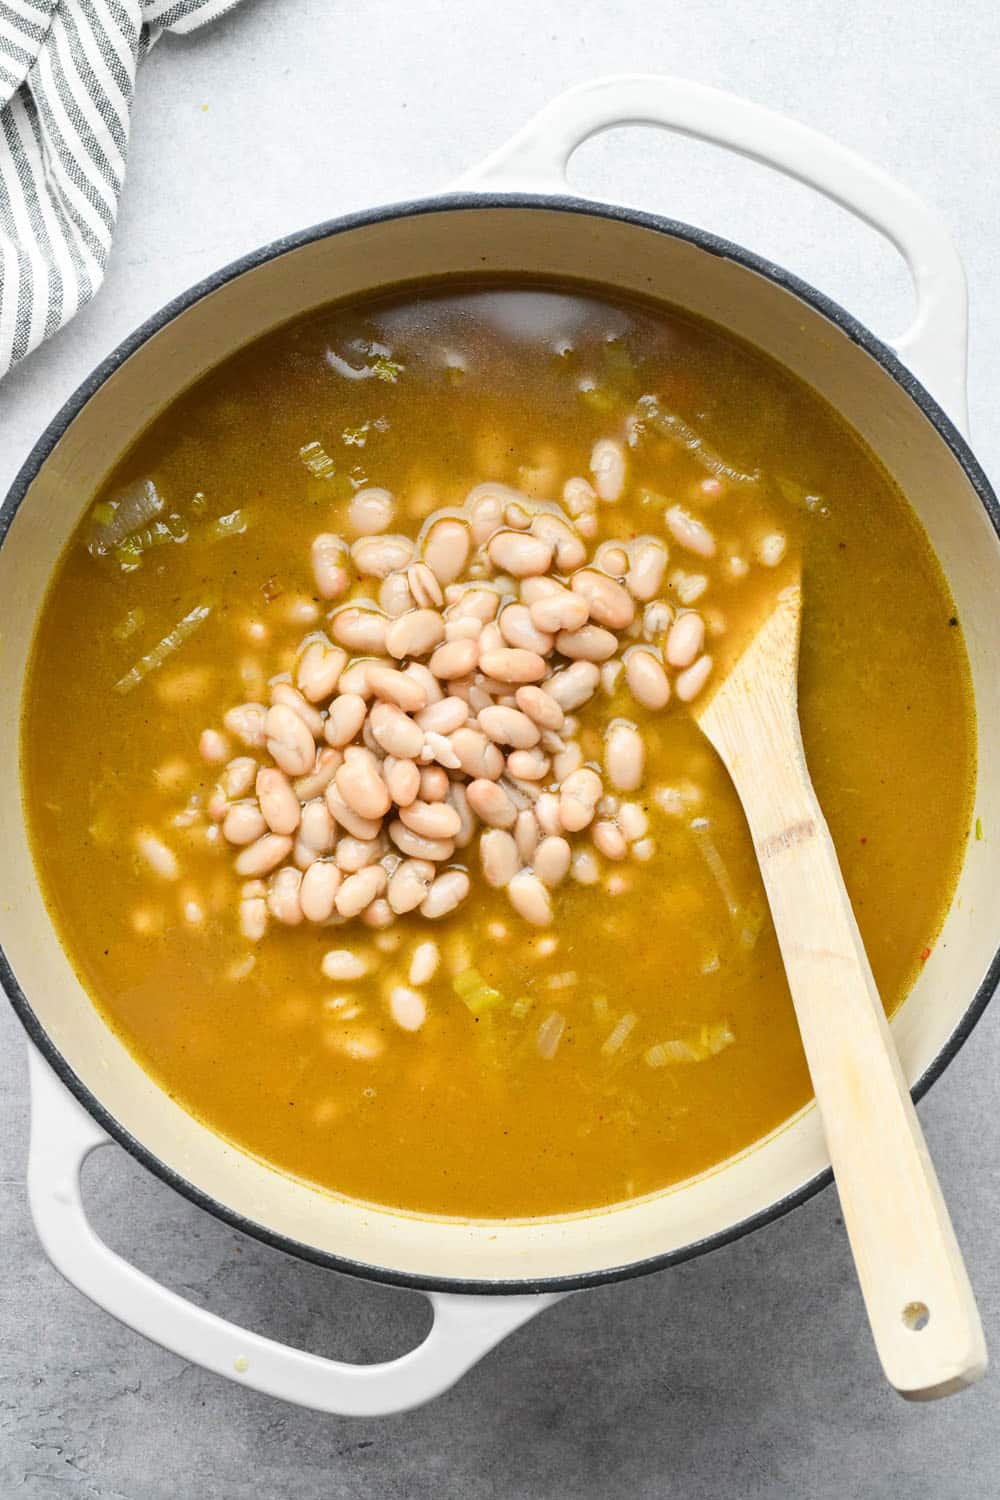 How to make White Bean and Kale Soup: Beans added to soup pot with broth and veggies.